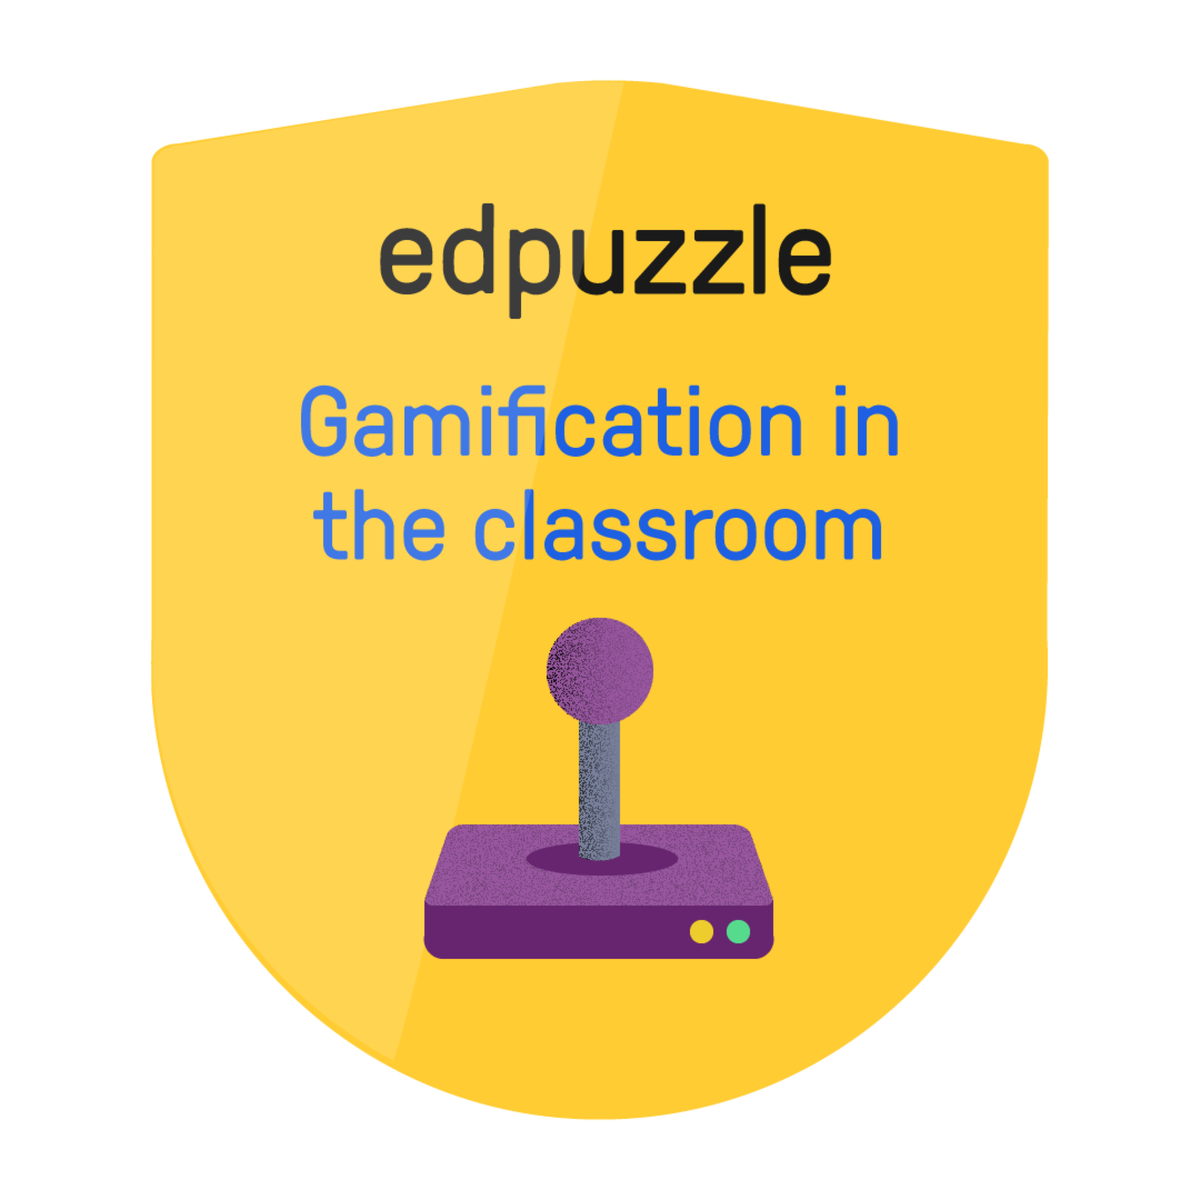 How much learning, how many techniques, how many concepts. @edpuzzle's training is definitely a great source of inspiration. #gamification #PBL #problembasedlearning #edpuzzle